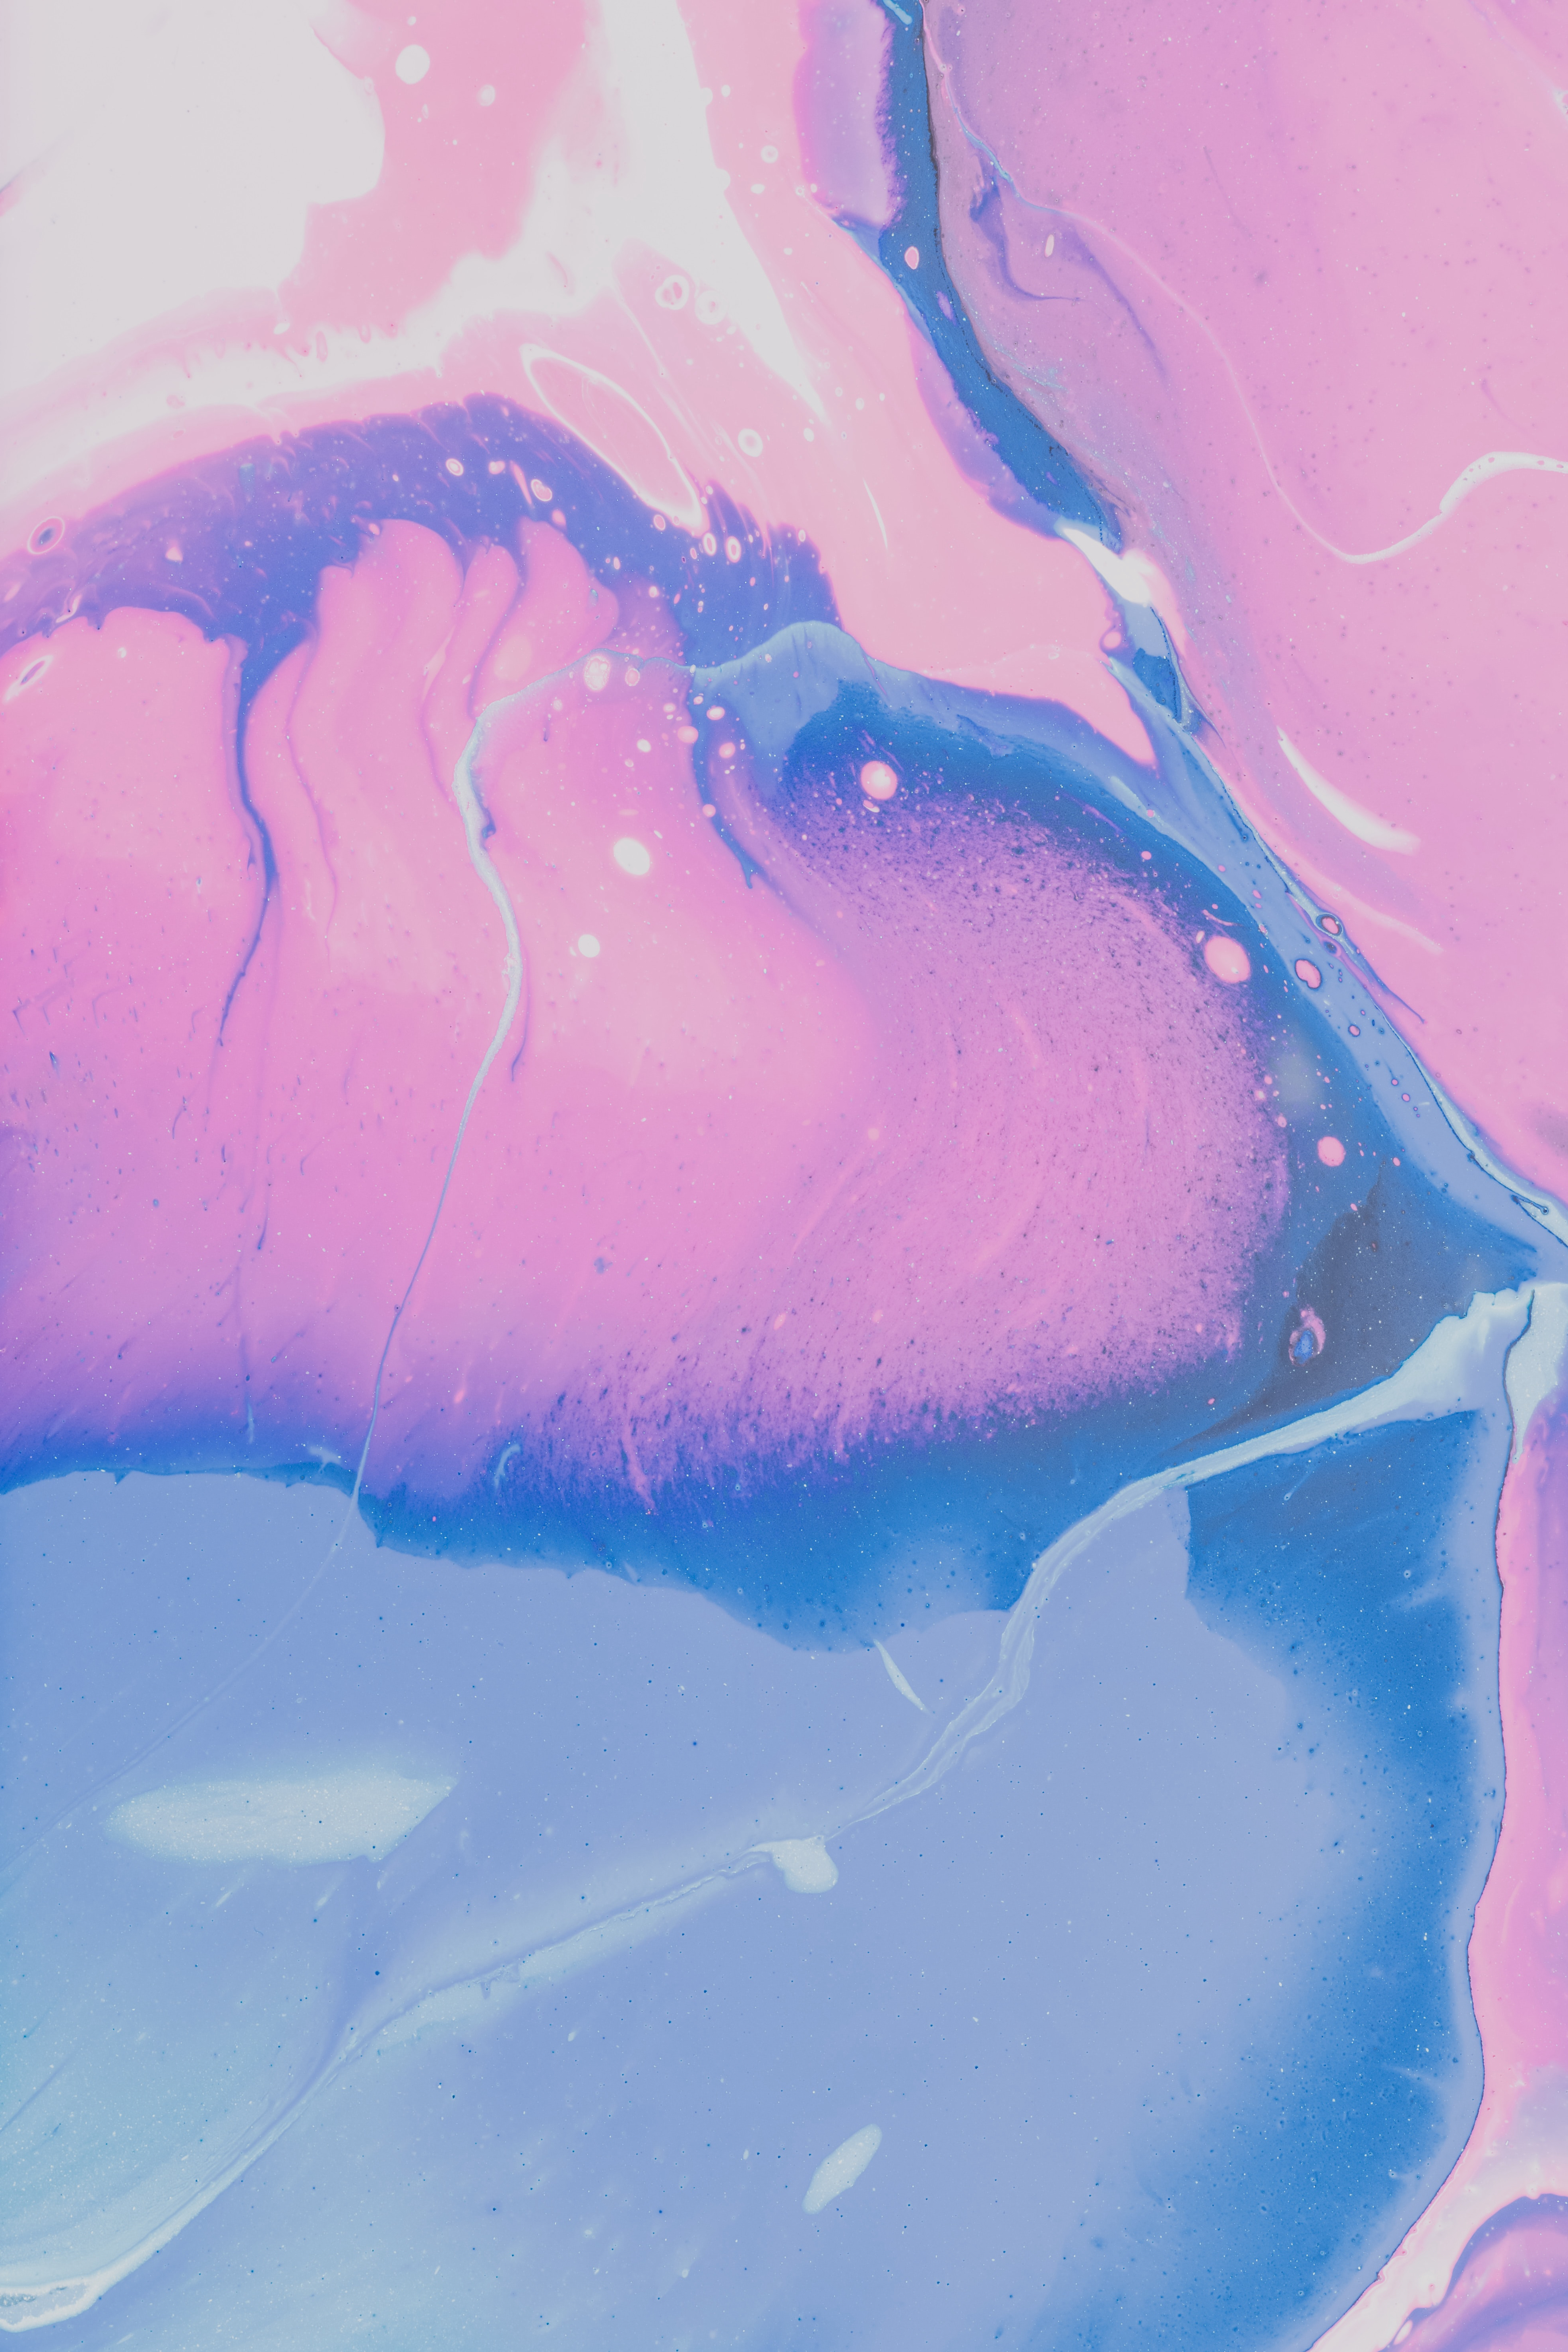 Windows Wallpaper Abstract blue, stains, pink, divorces